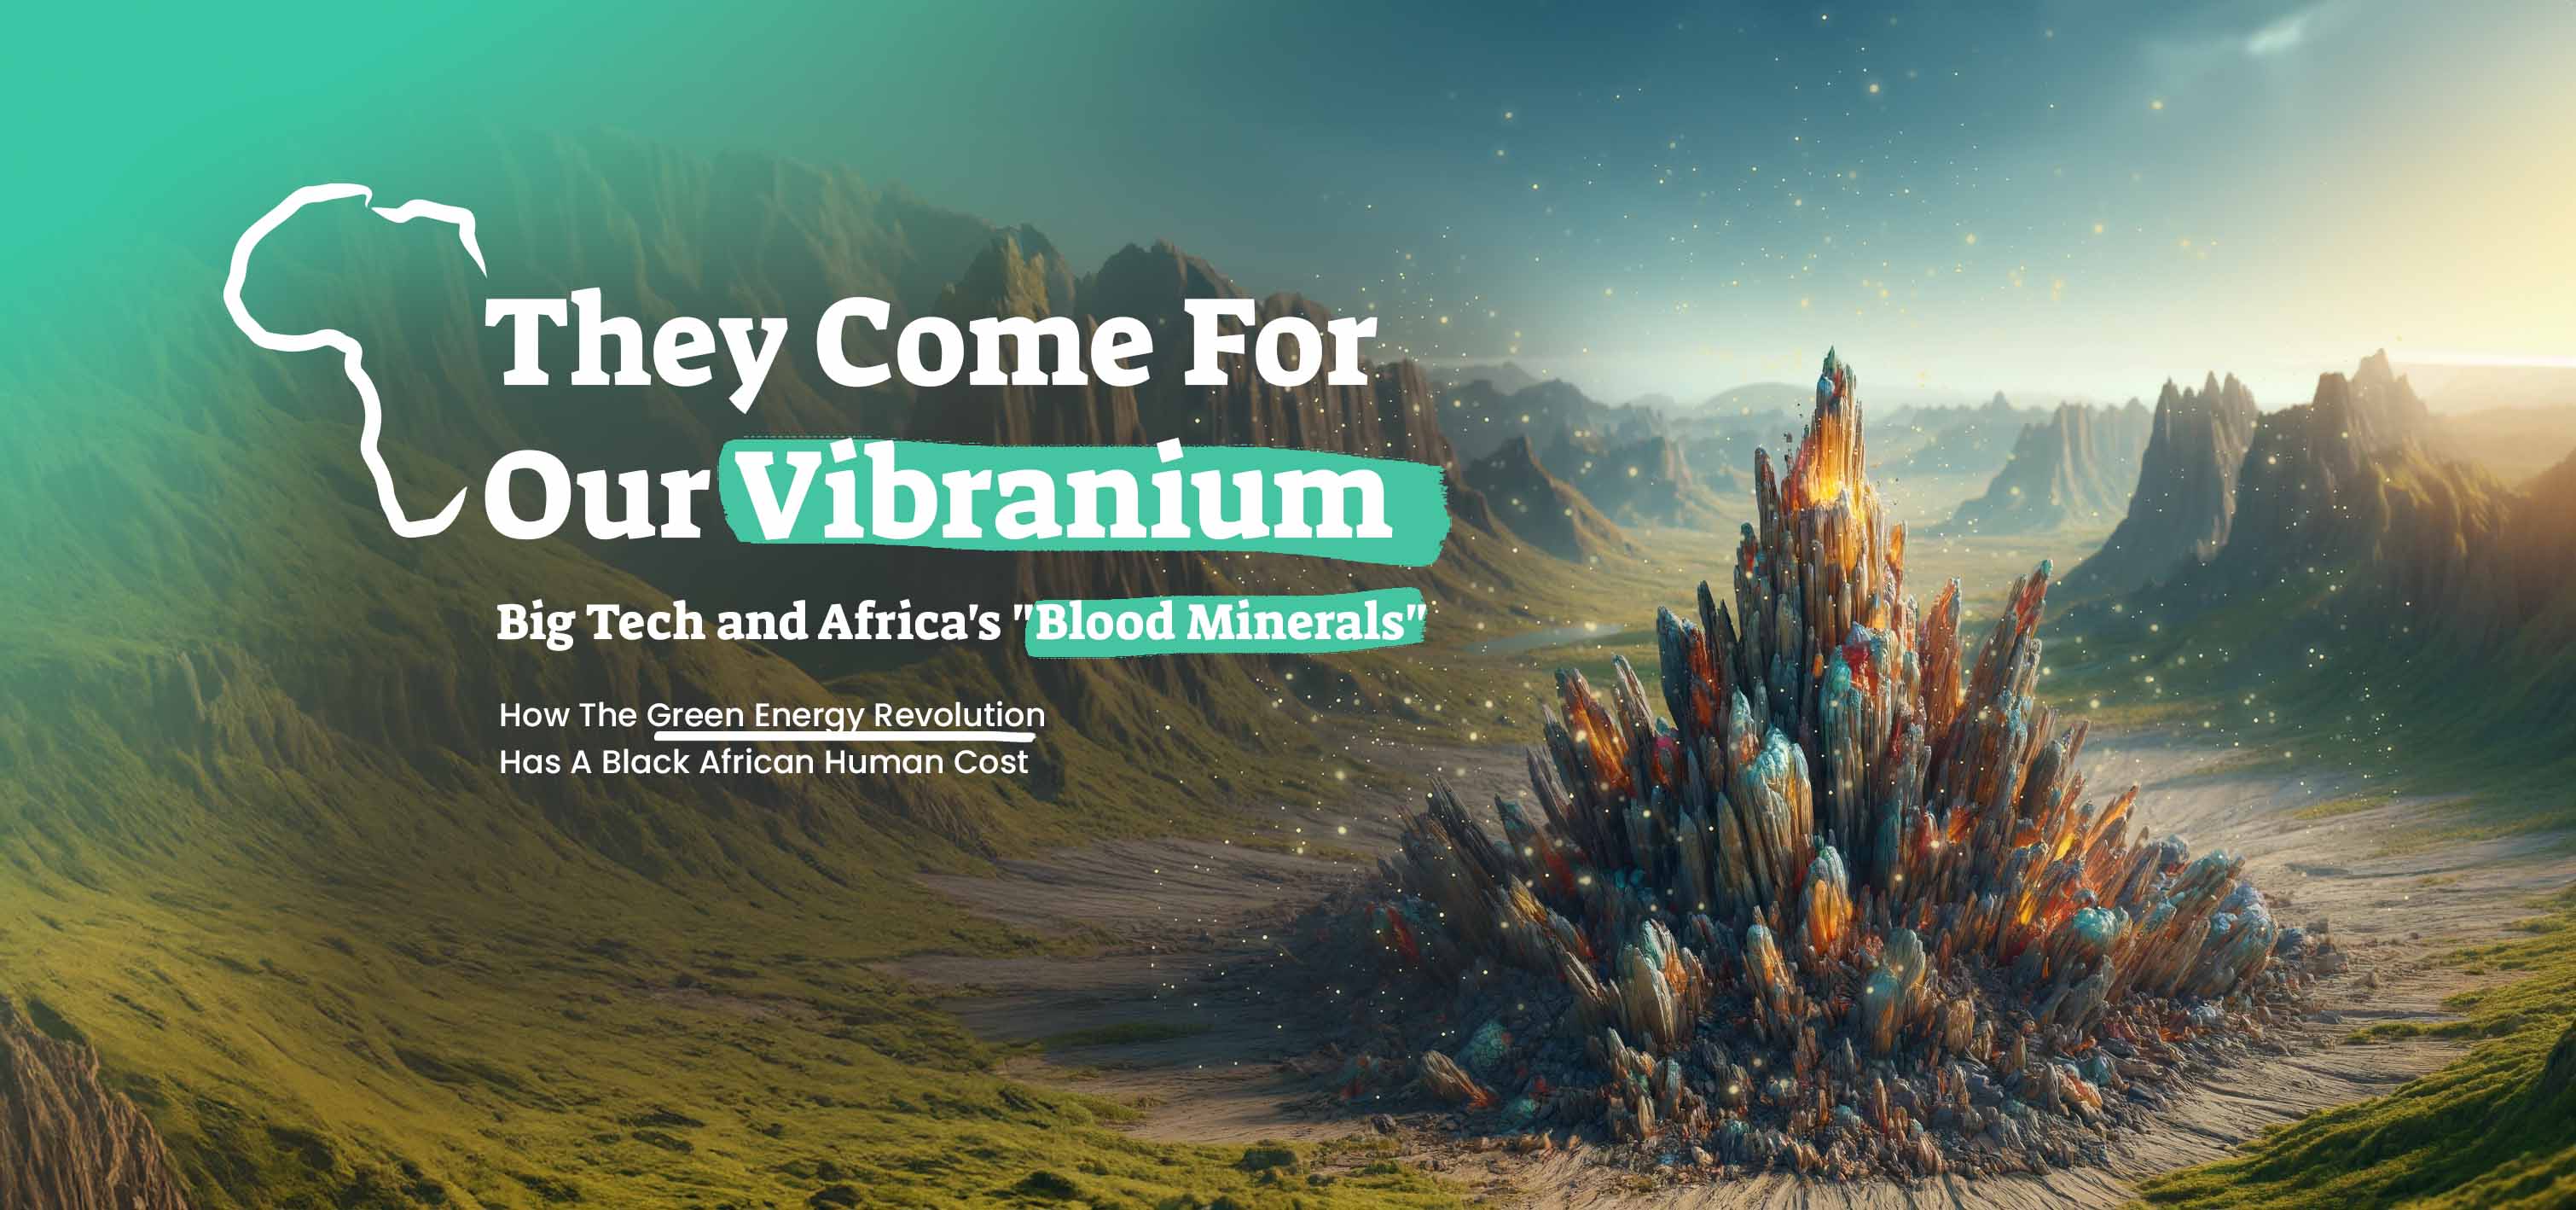 Congo and Africa's Blood minerals show as bright glowing colorful rocks erupting from the ground like vibranium crystals. 